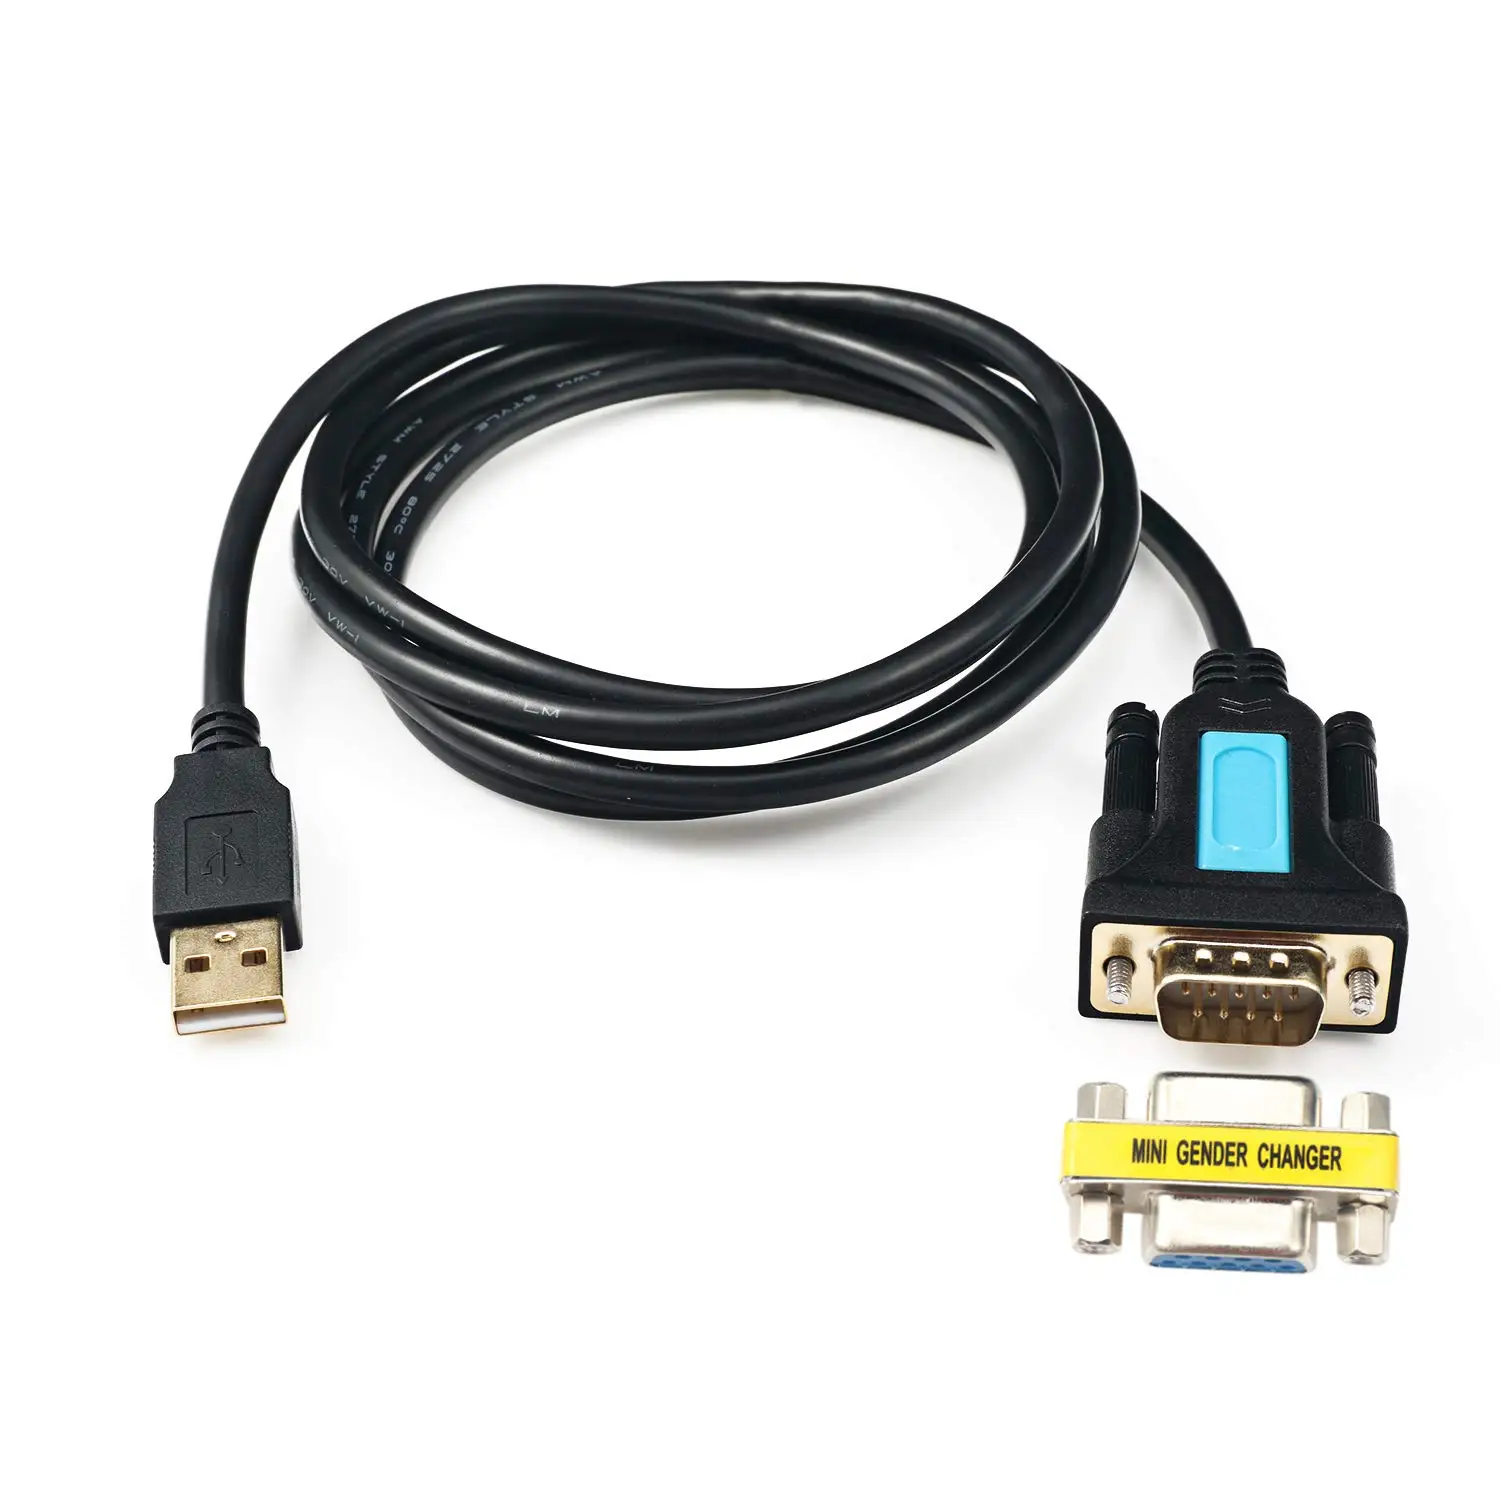 

USB to RS232 Adapter with Prolific PL2303 Chipset for Windows XP, Windows Vista, 7, 8, 10, Mac OS Linux